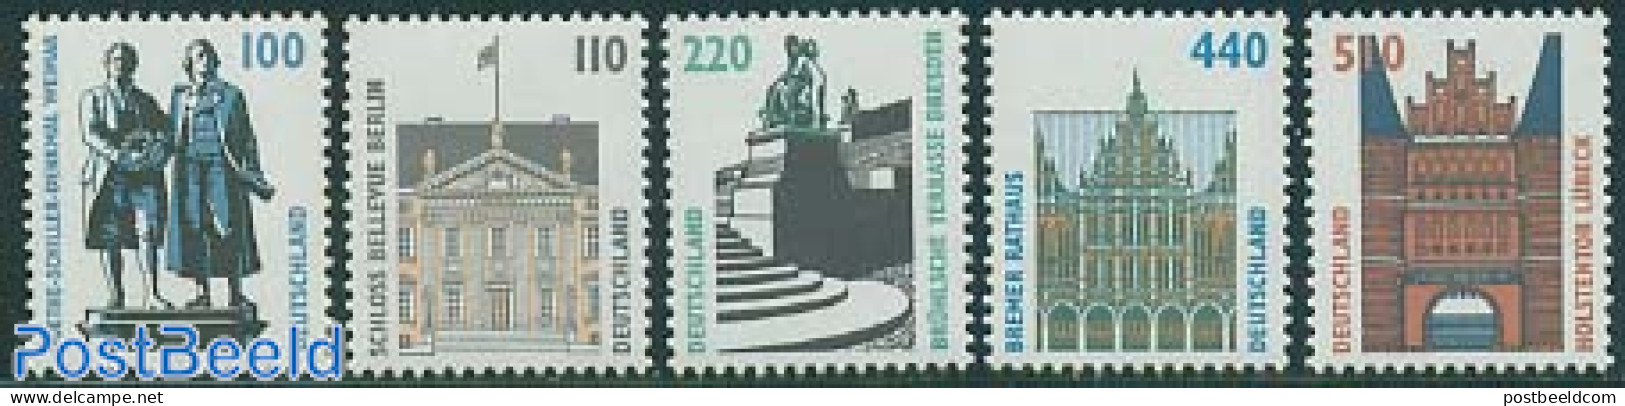 Germany, Federal Republic 1997 Definitives 5v, Mint NH, Art - Castles & Fortifications - Sculpture - Ungebraucht